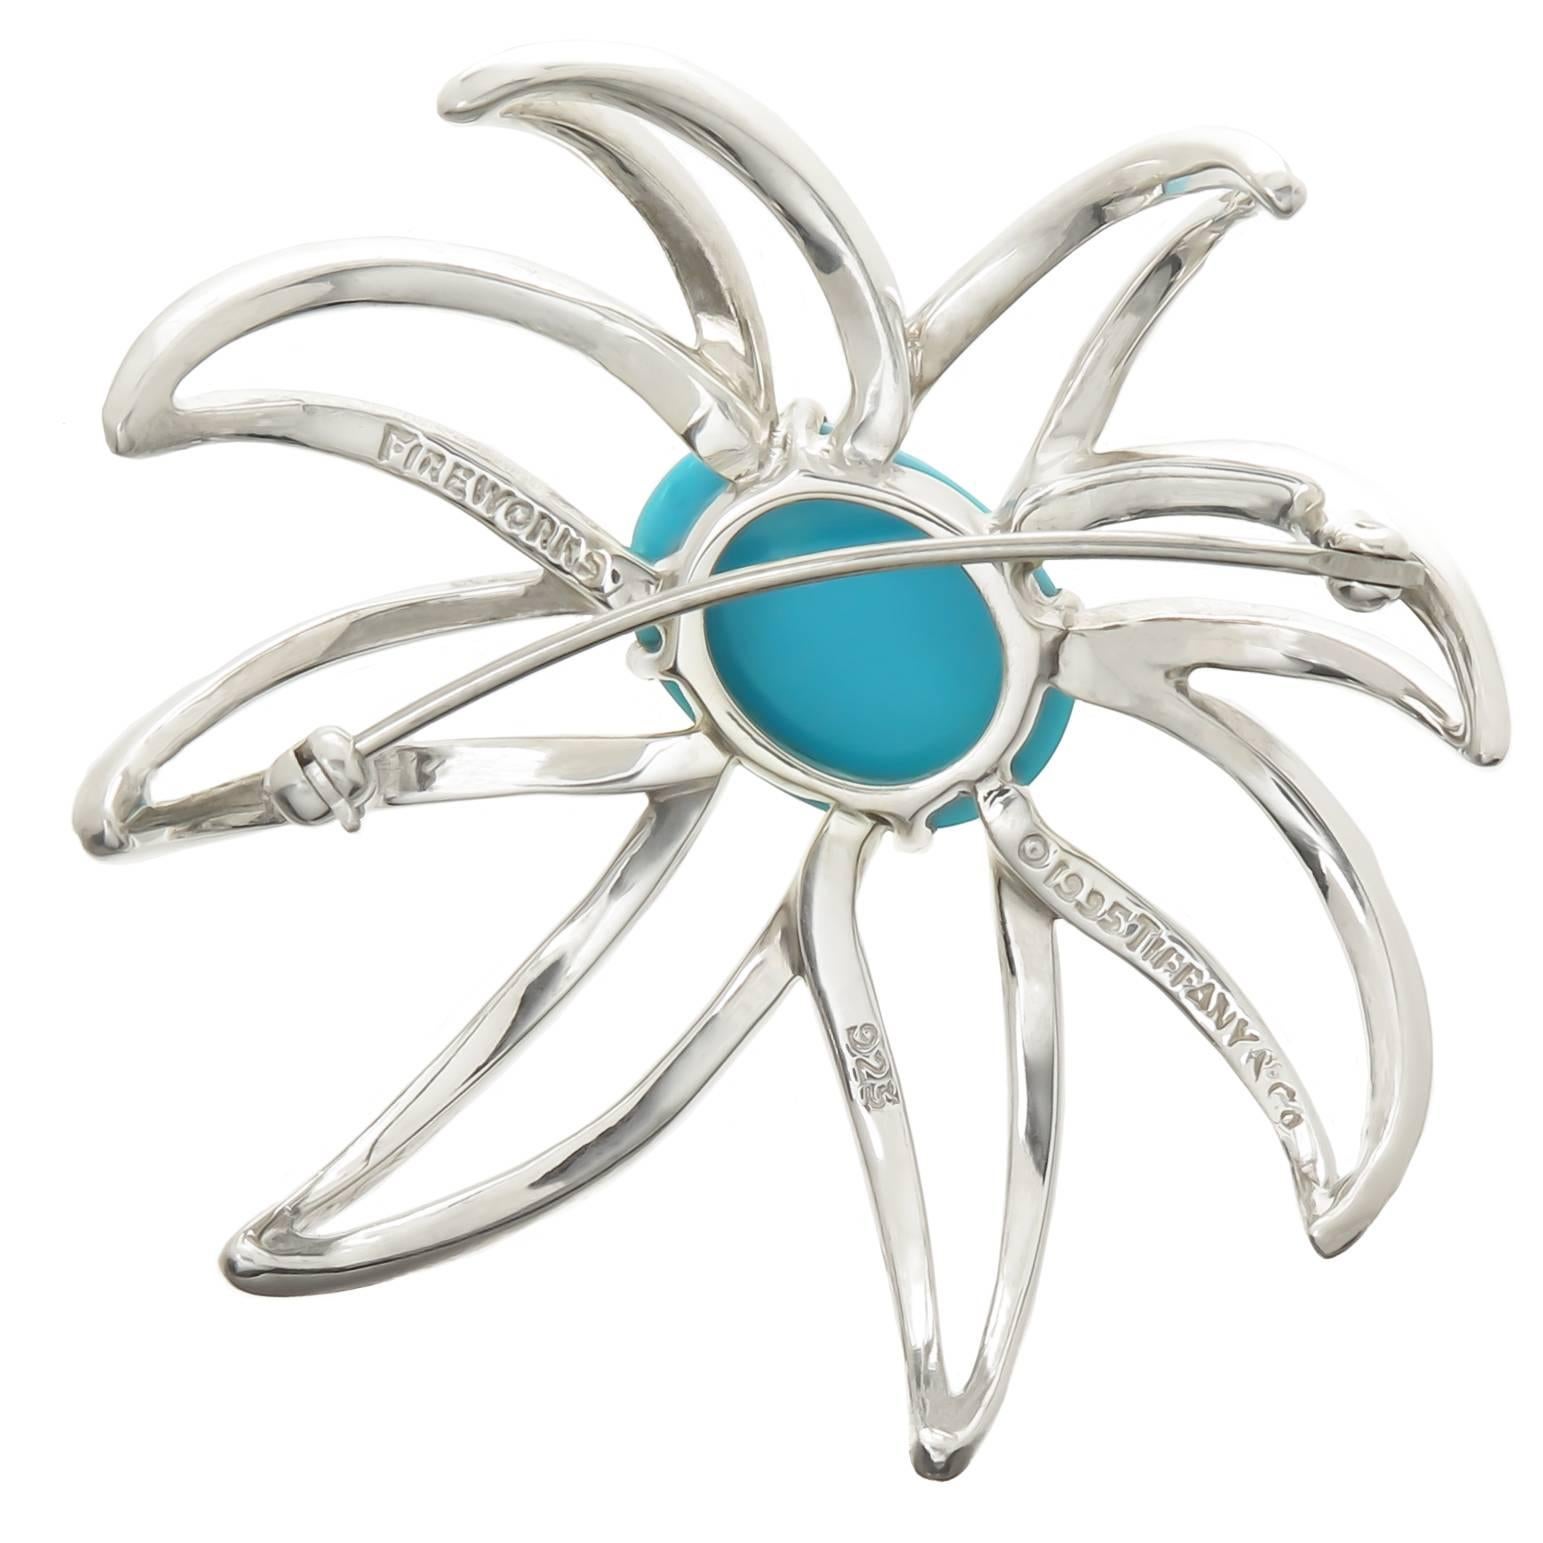 Circa 1995 Tiffany & Company Fireworks collection Sterling silver and Turquoise brooch. Measuring 2 X 2 inches and Centrally set with a Fine Color Persian Turquoise. Excellent Condition.